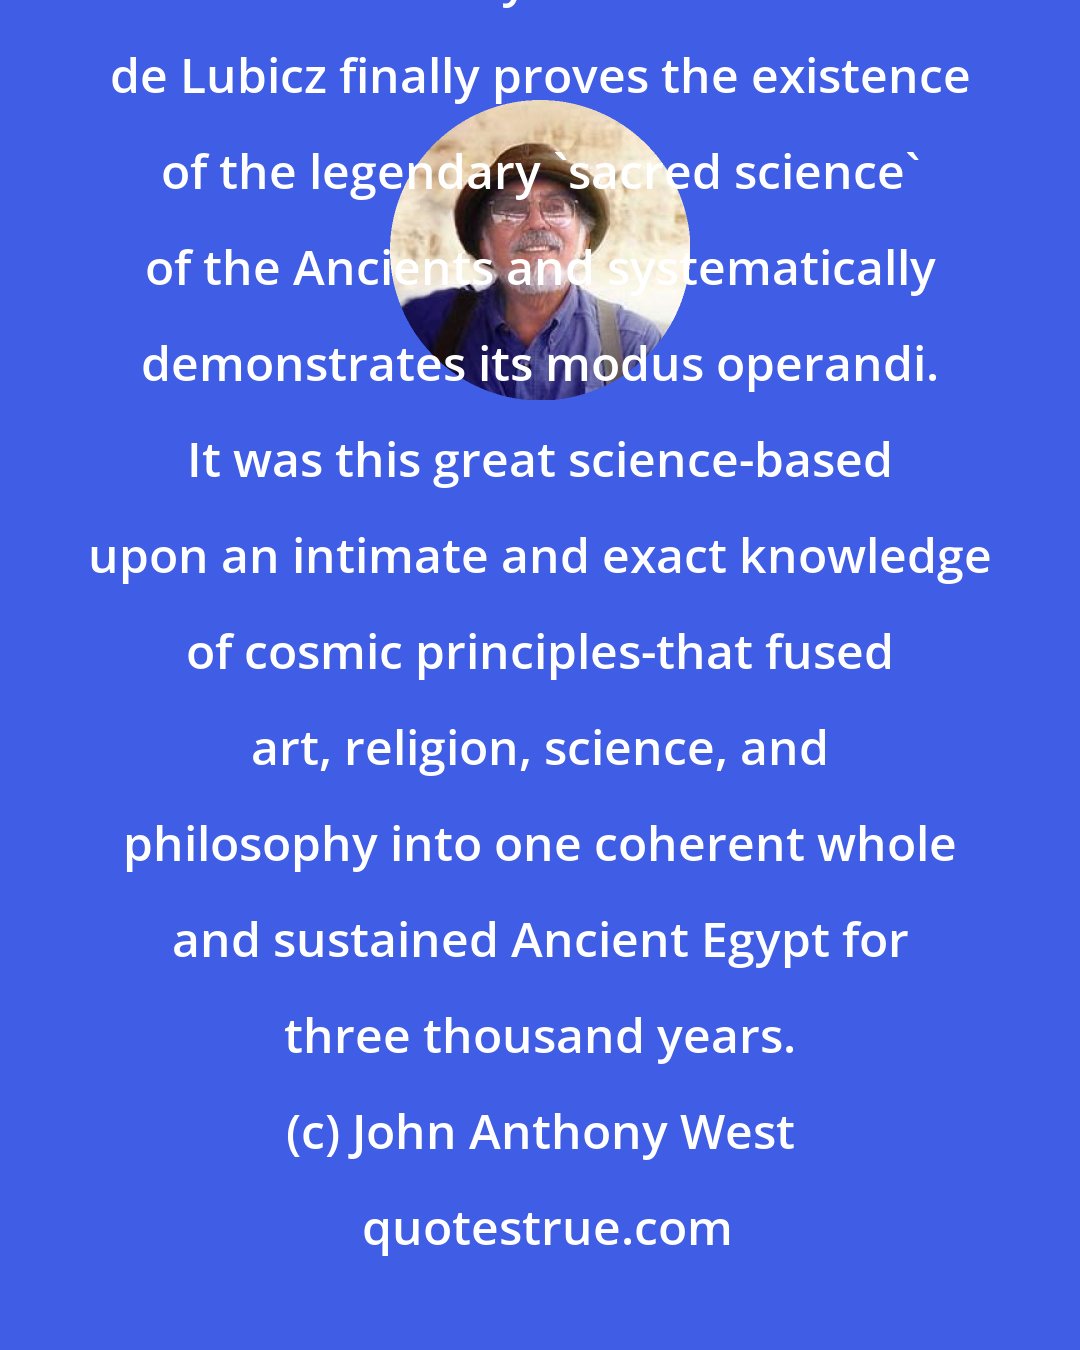 John Anthony West: In my view, The Temple of Man is the most important work of scholarship of this century. R. A. Schwaller de Lubicz finally proves the existence of the legendary 'sacred science' of the Ancients and systematically demonstrates its modus operandi. It was this great science-based upon an intimate and exact knowledge of cosmic principles-that fused art, religion, science, and philosophy into one coherent whole and sustained Ancient Egypt for three thousand years.